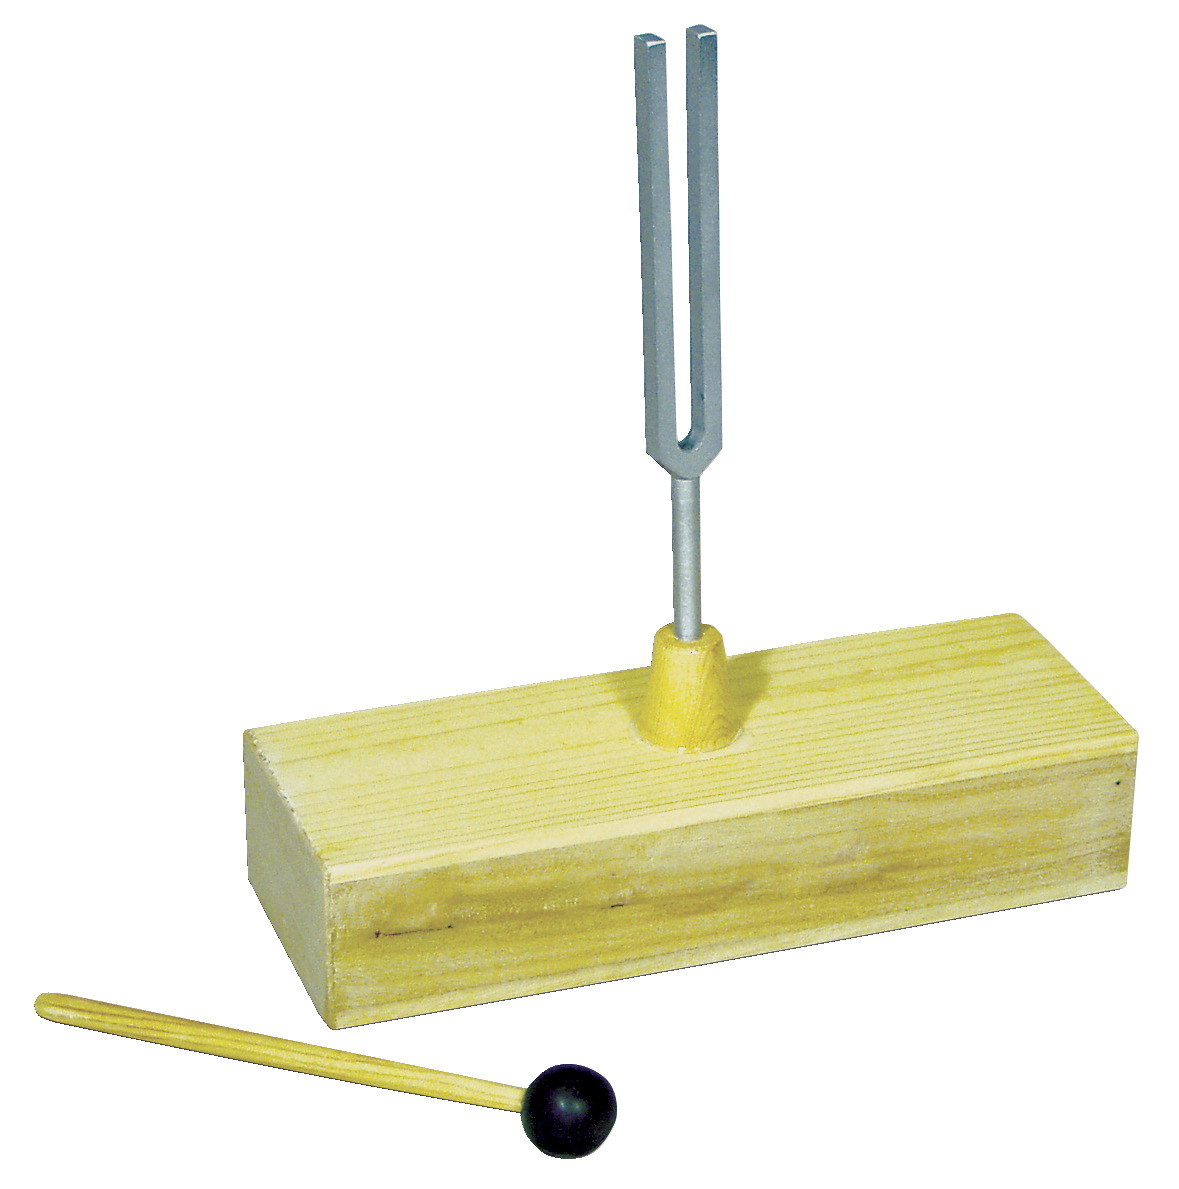 Picture of Delta Education 181-2513 Resonance Box with Tuning Fork - 256 Hz